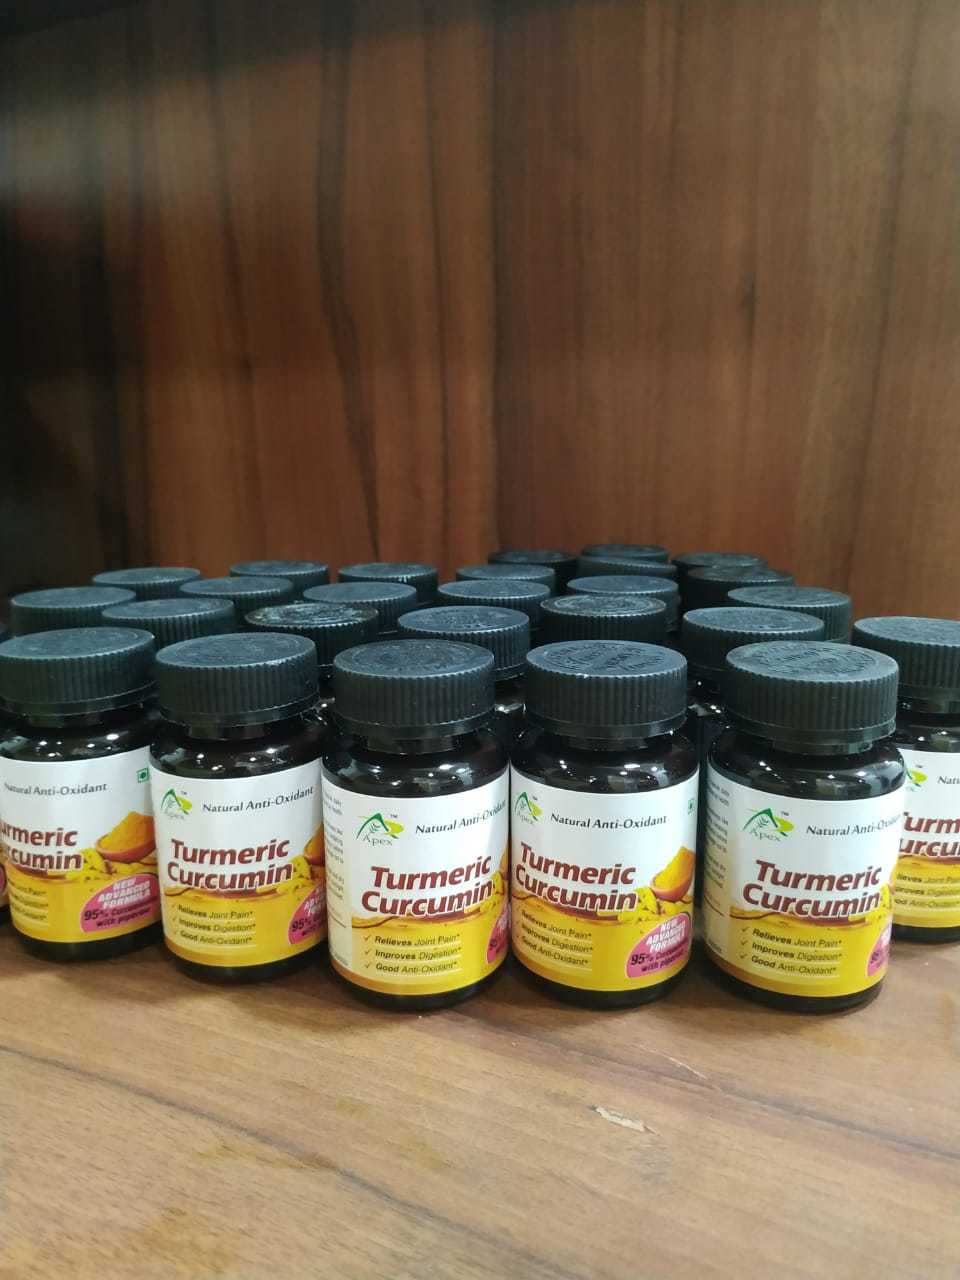 Turmeric Curcumin Capsules 95% Curcuminoids With Piperine, Oem And Private Labeling Available Gmp & Halal